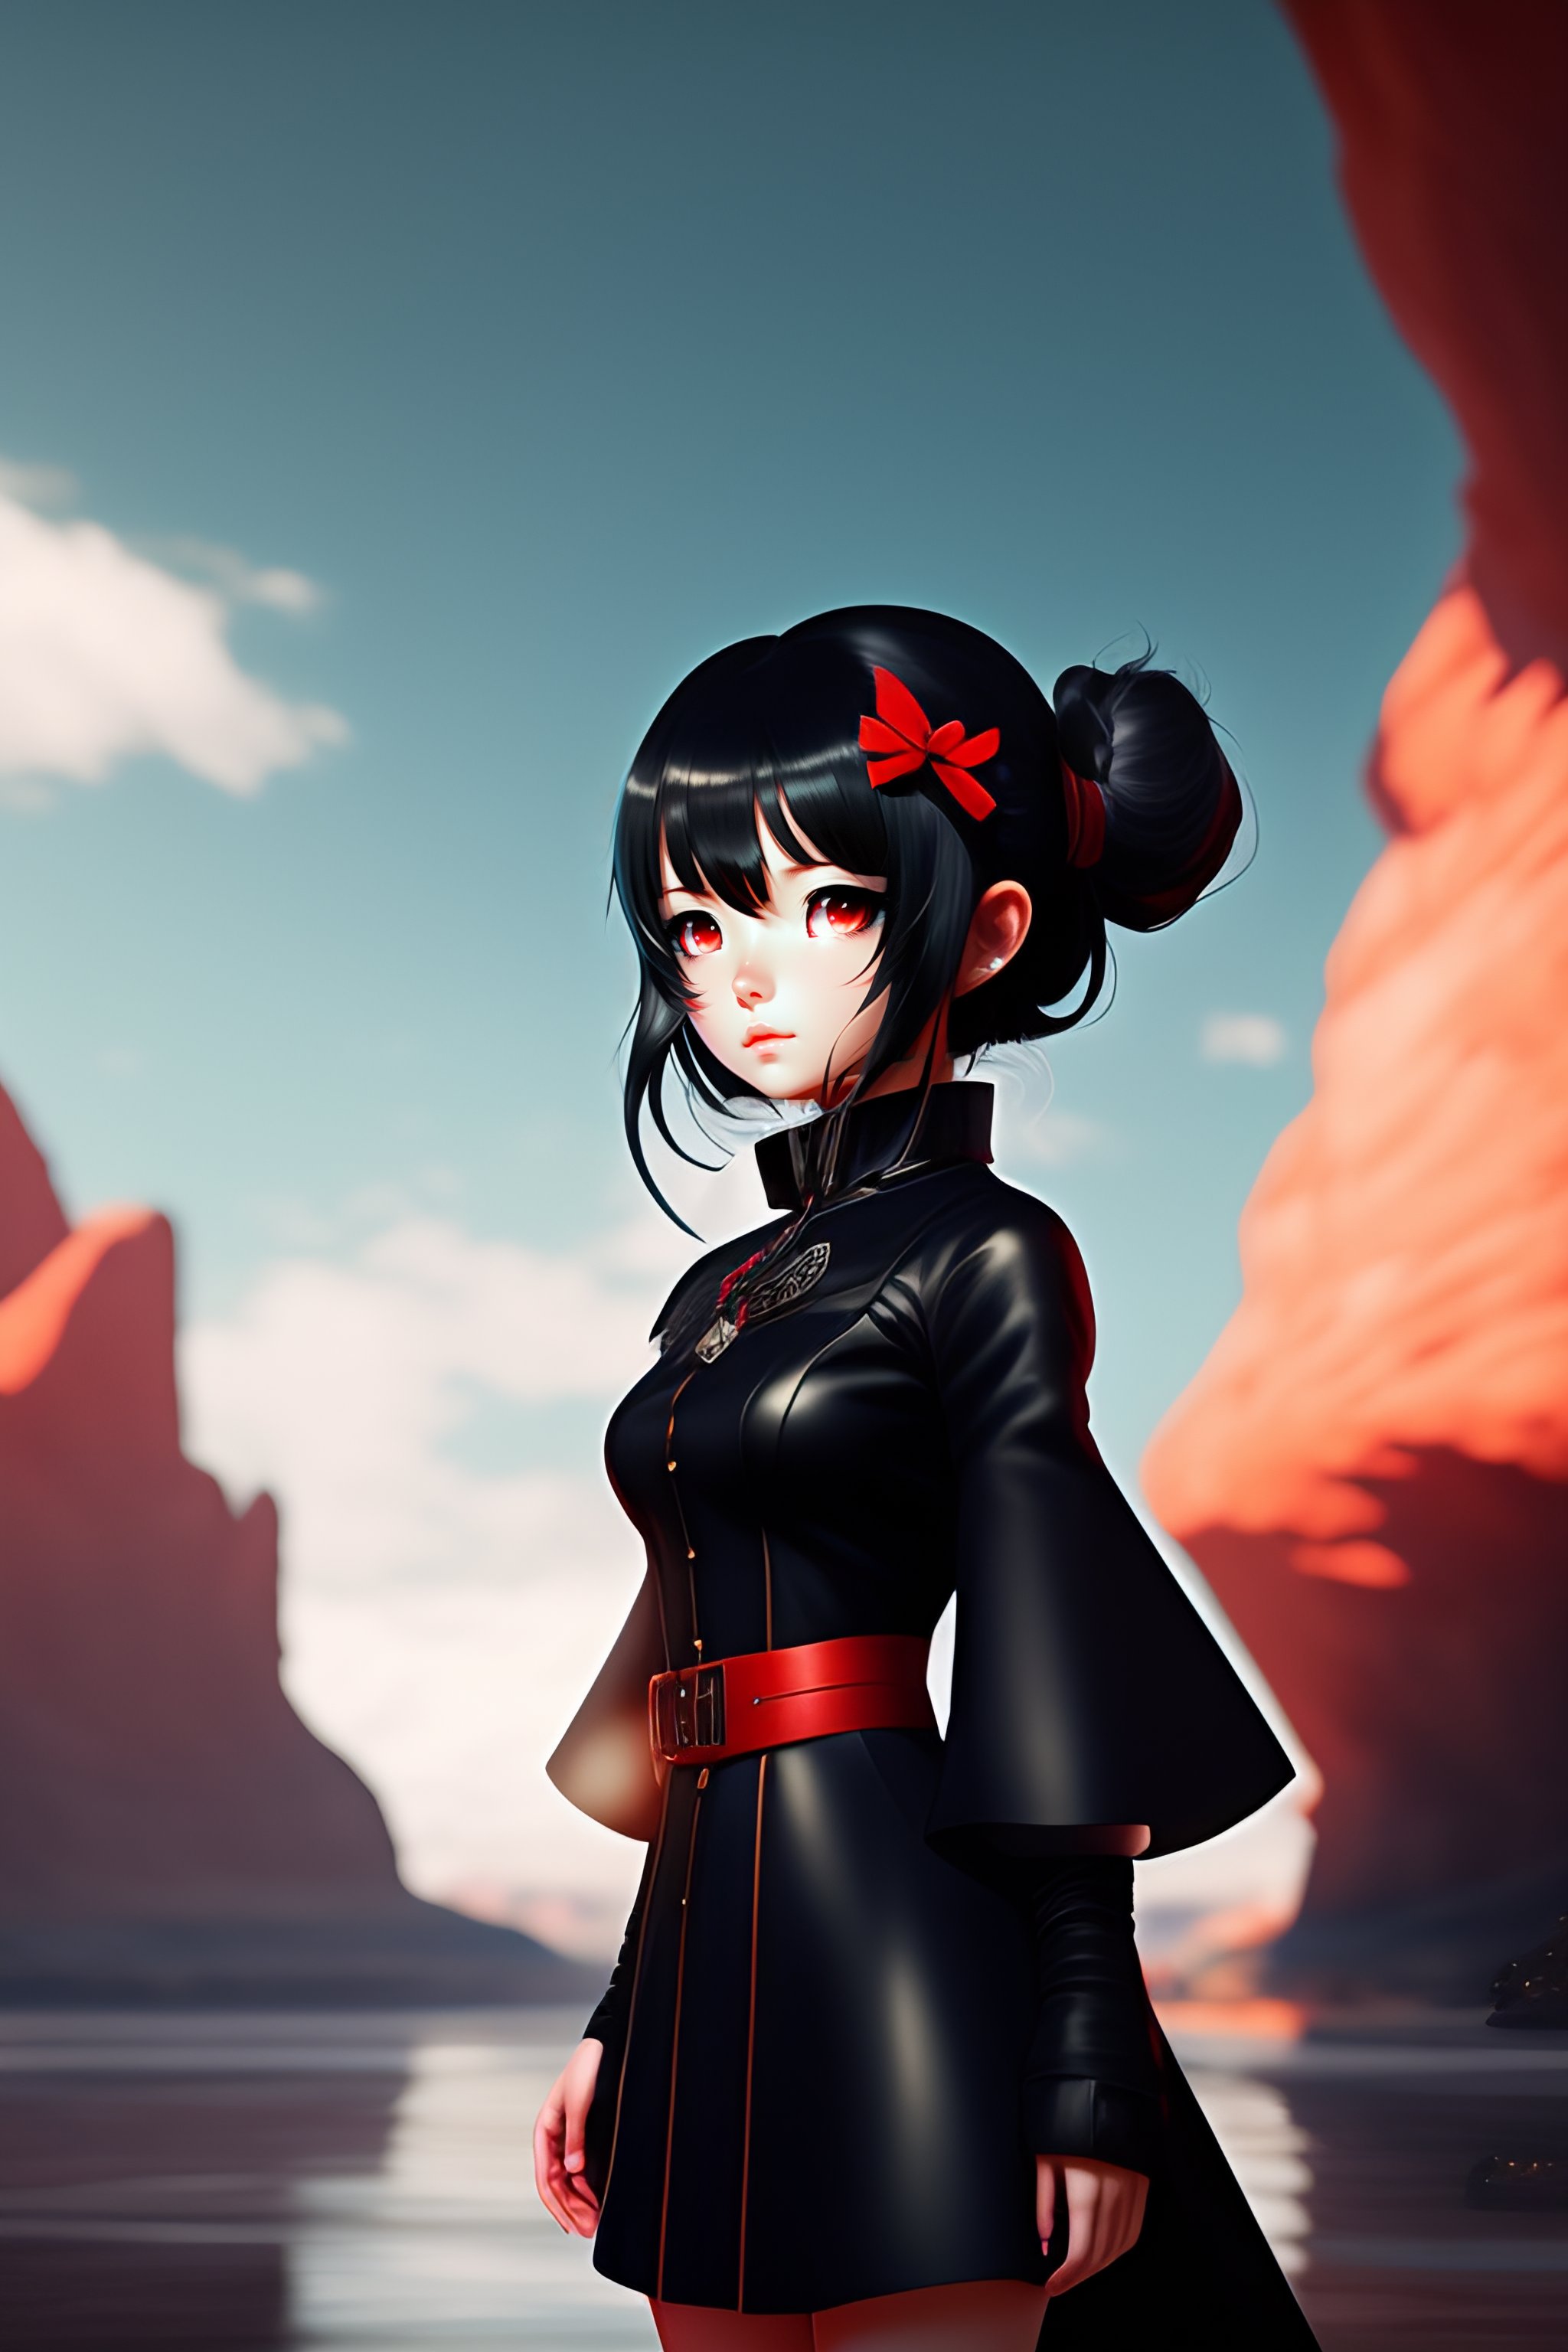 Lexica - Cute anime girl with red eyes black hair wearing black-red outfit  costume, black hair, black leather choker, in the beautiful landscape,  pho...